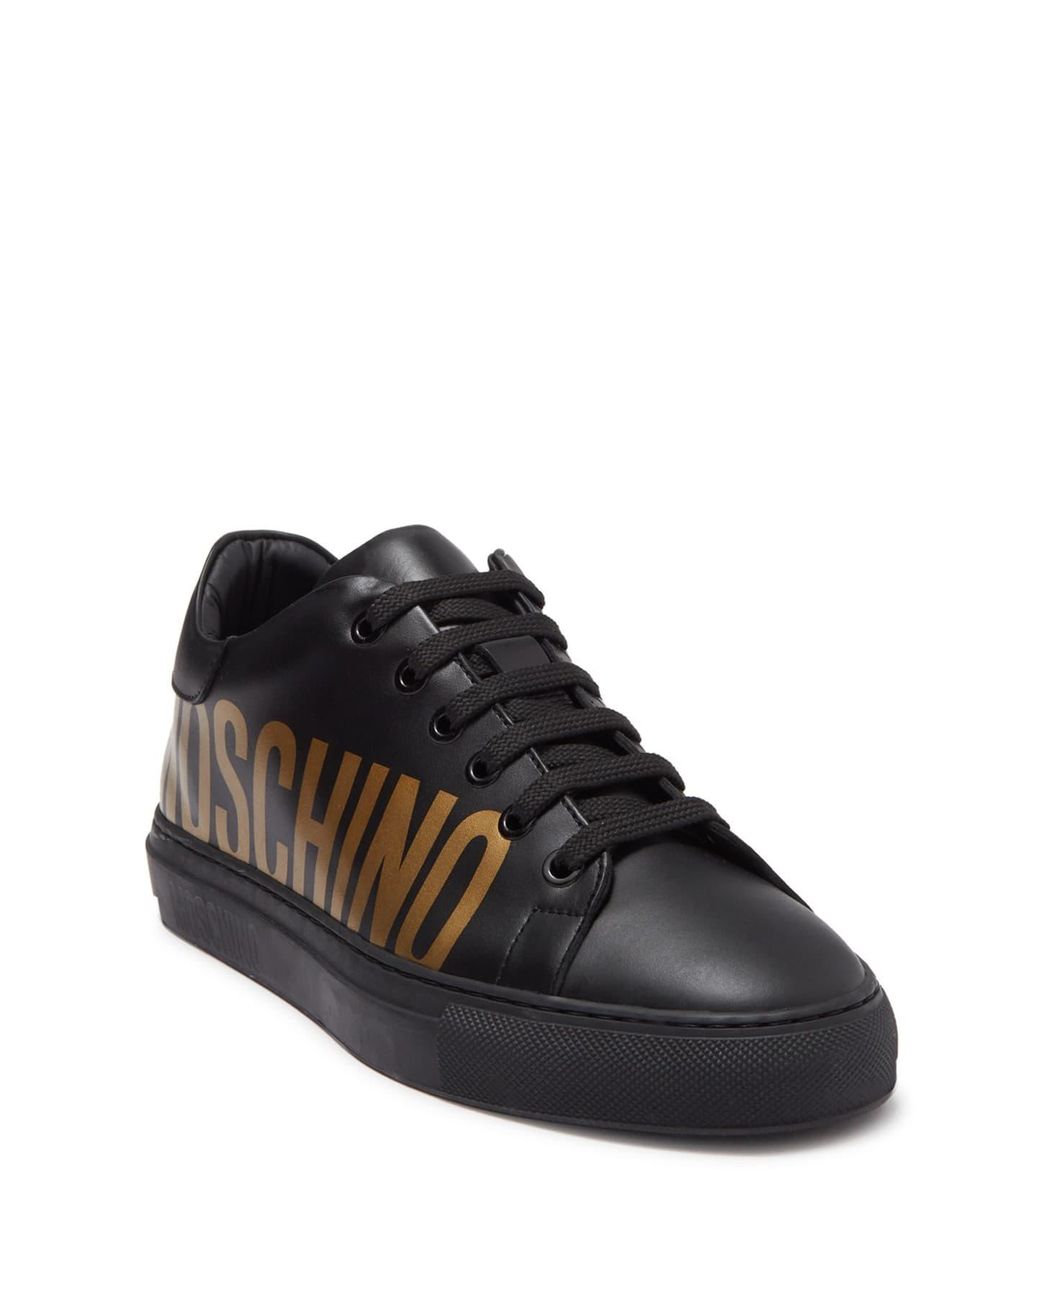 Moschino Leather Logo Print Tennis Sneaker in Black - Lyst